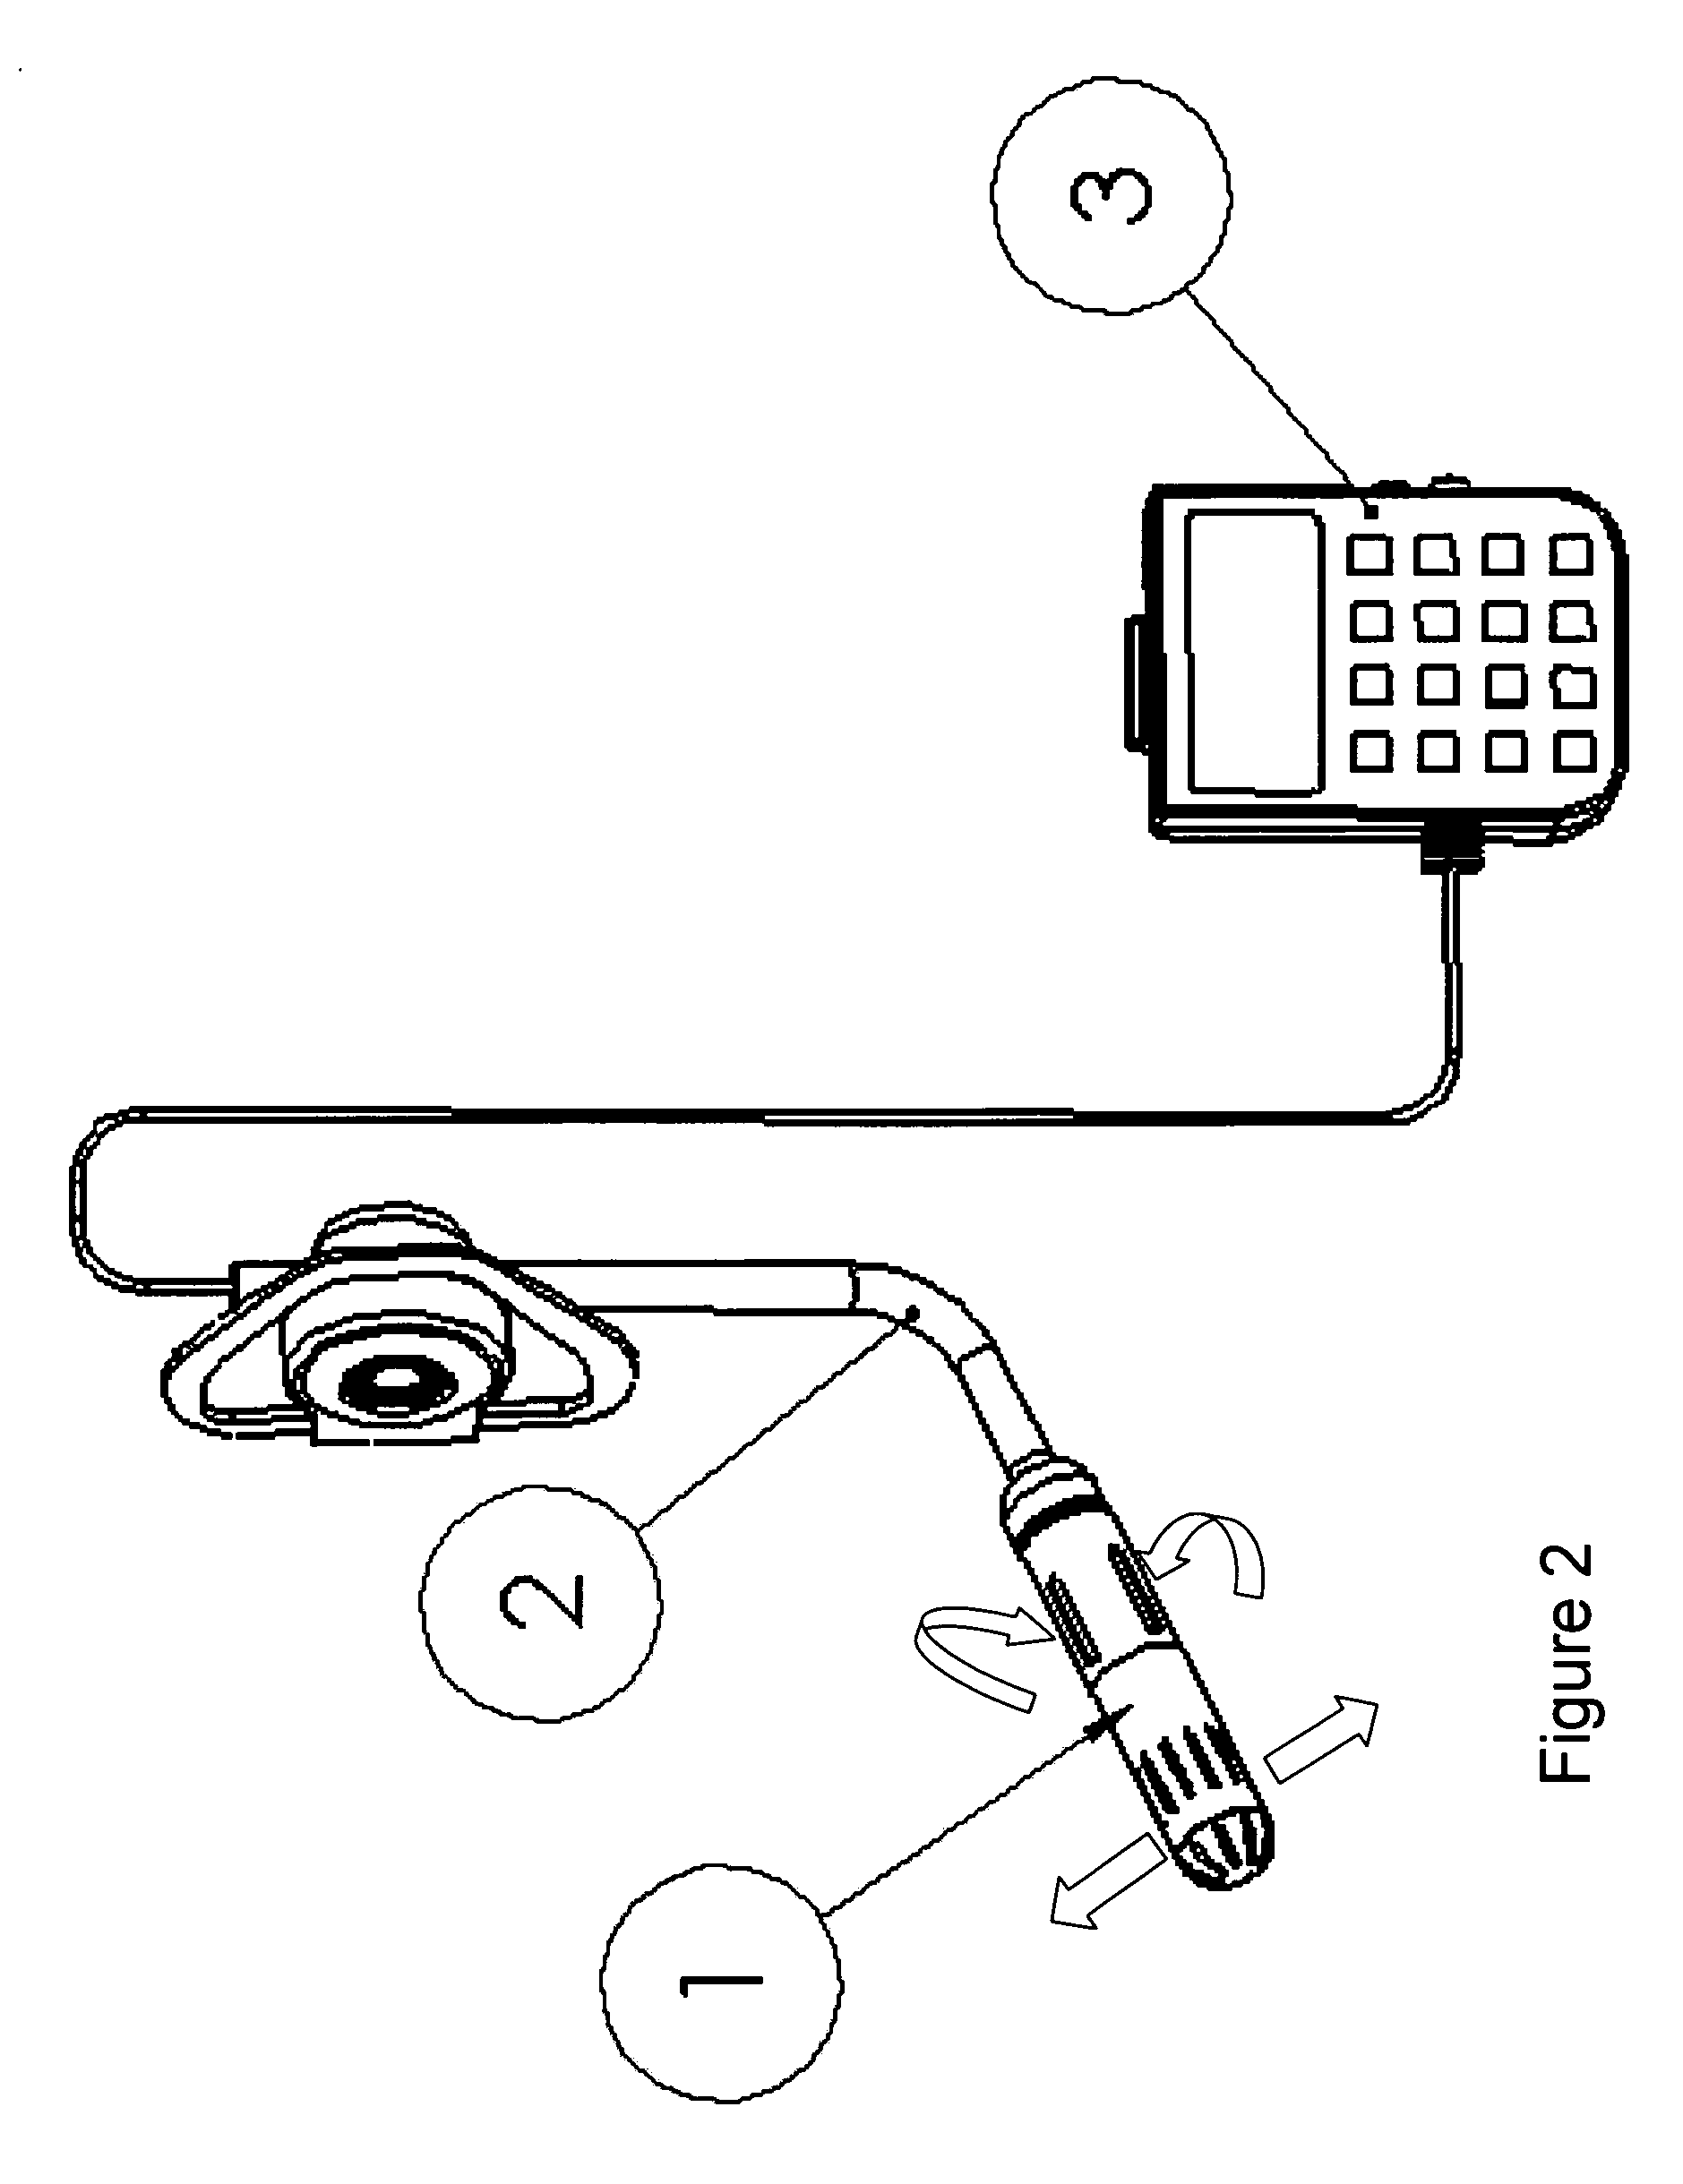 Method and apparatus for micro-environment control